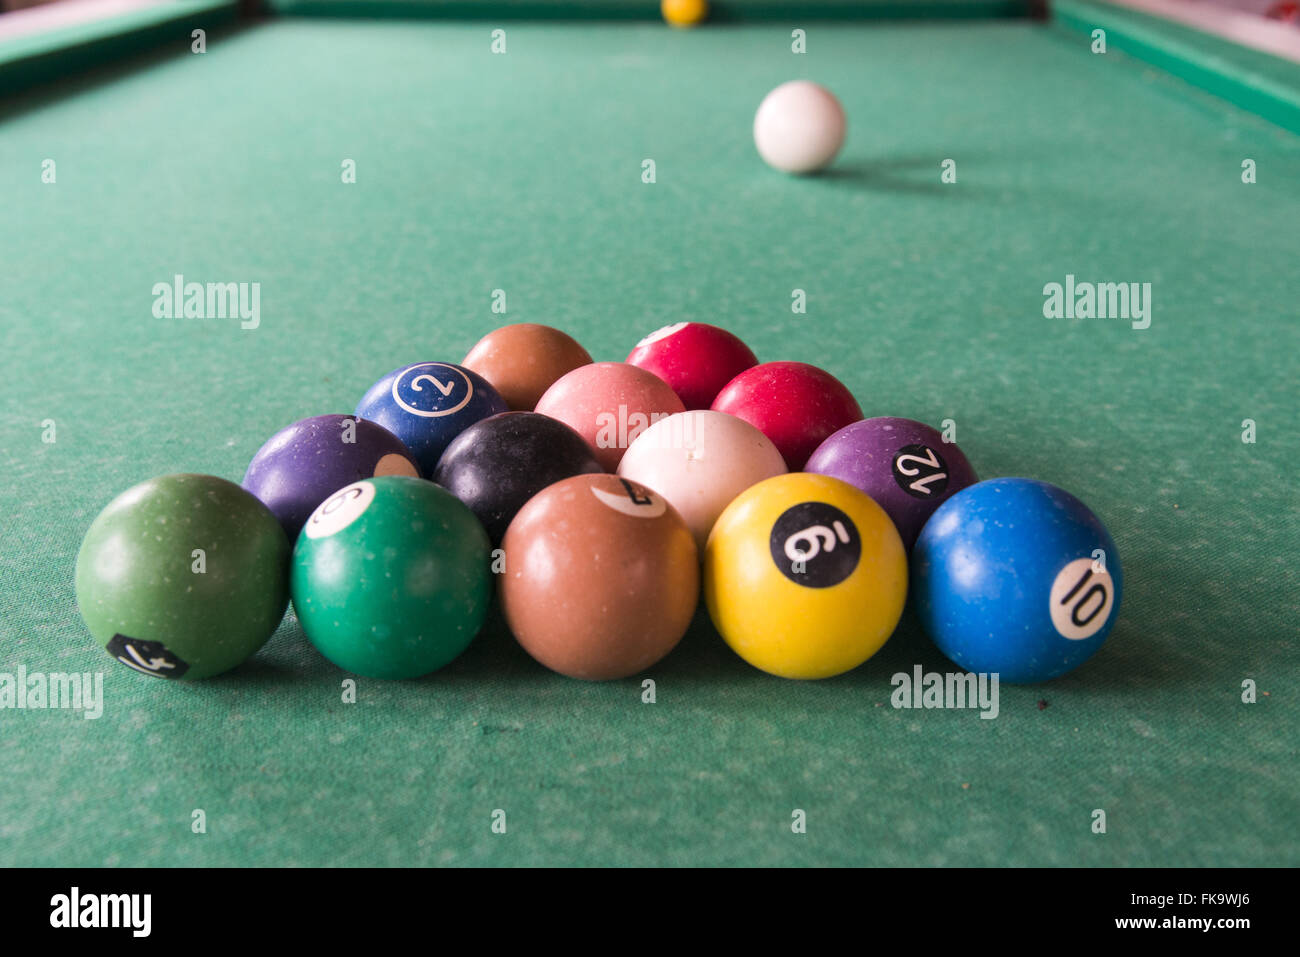 Pool table ready for play in maroon community bar - Ribeira Valley Stock Photo